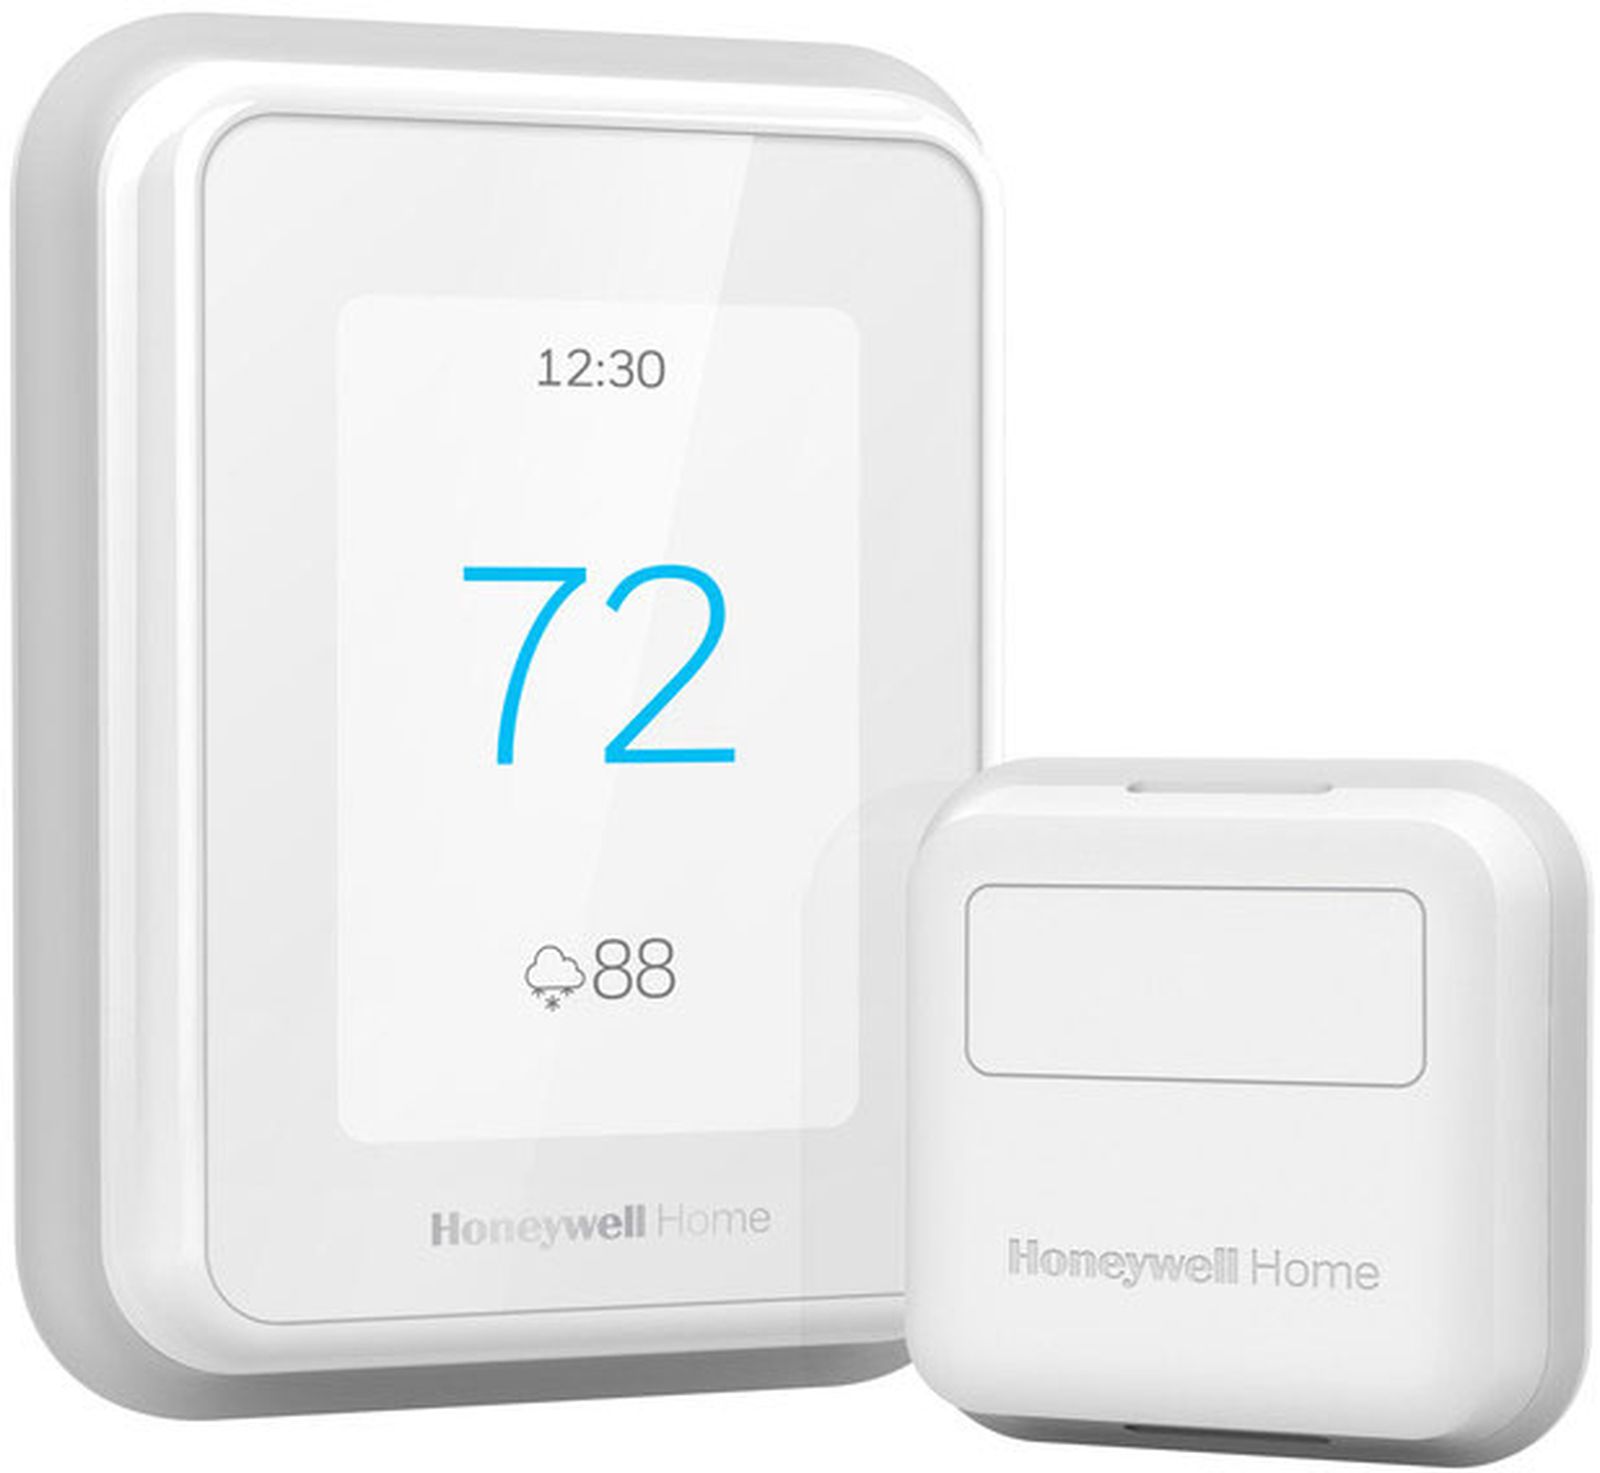 Ces 19 Honeywell Home T9 And T10 Pro Smart Thermostats Debut With Per Room Temperature Control Homekit Later This Year Macrumors